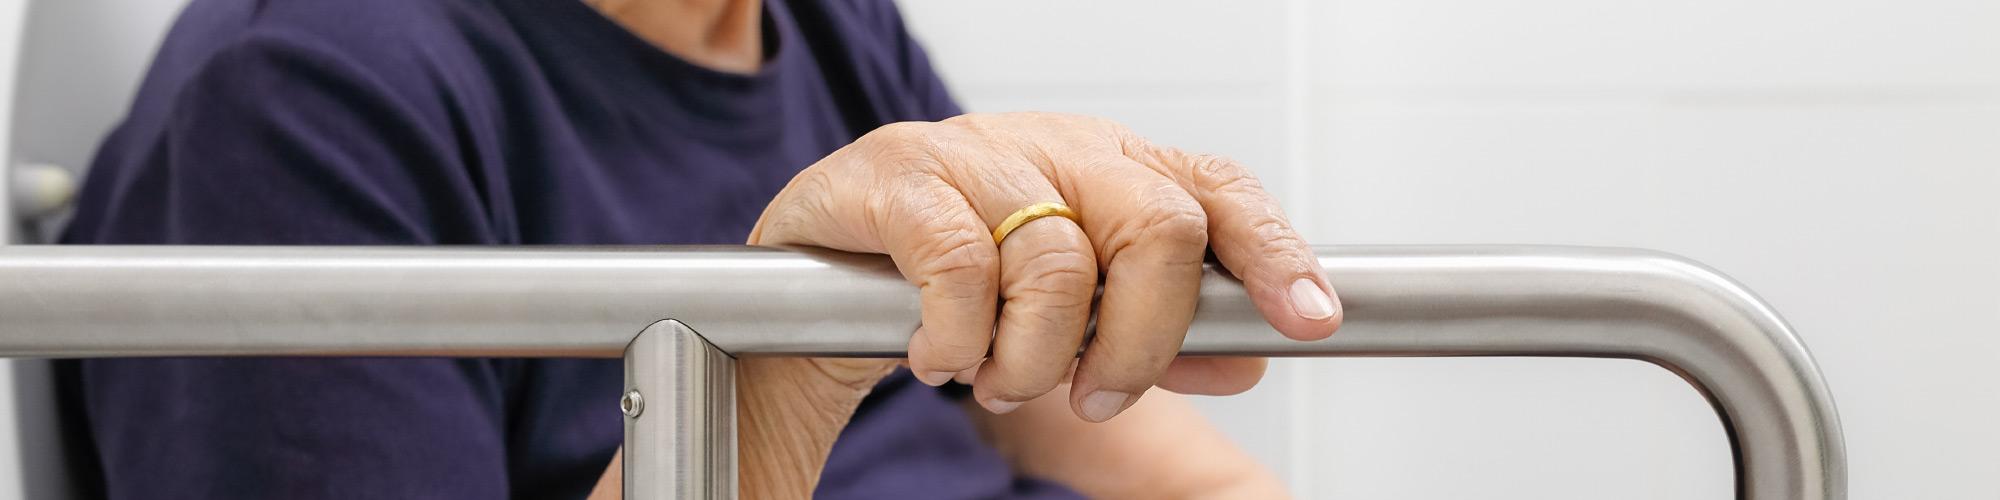 elderly hand holding on a metal handle